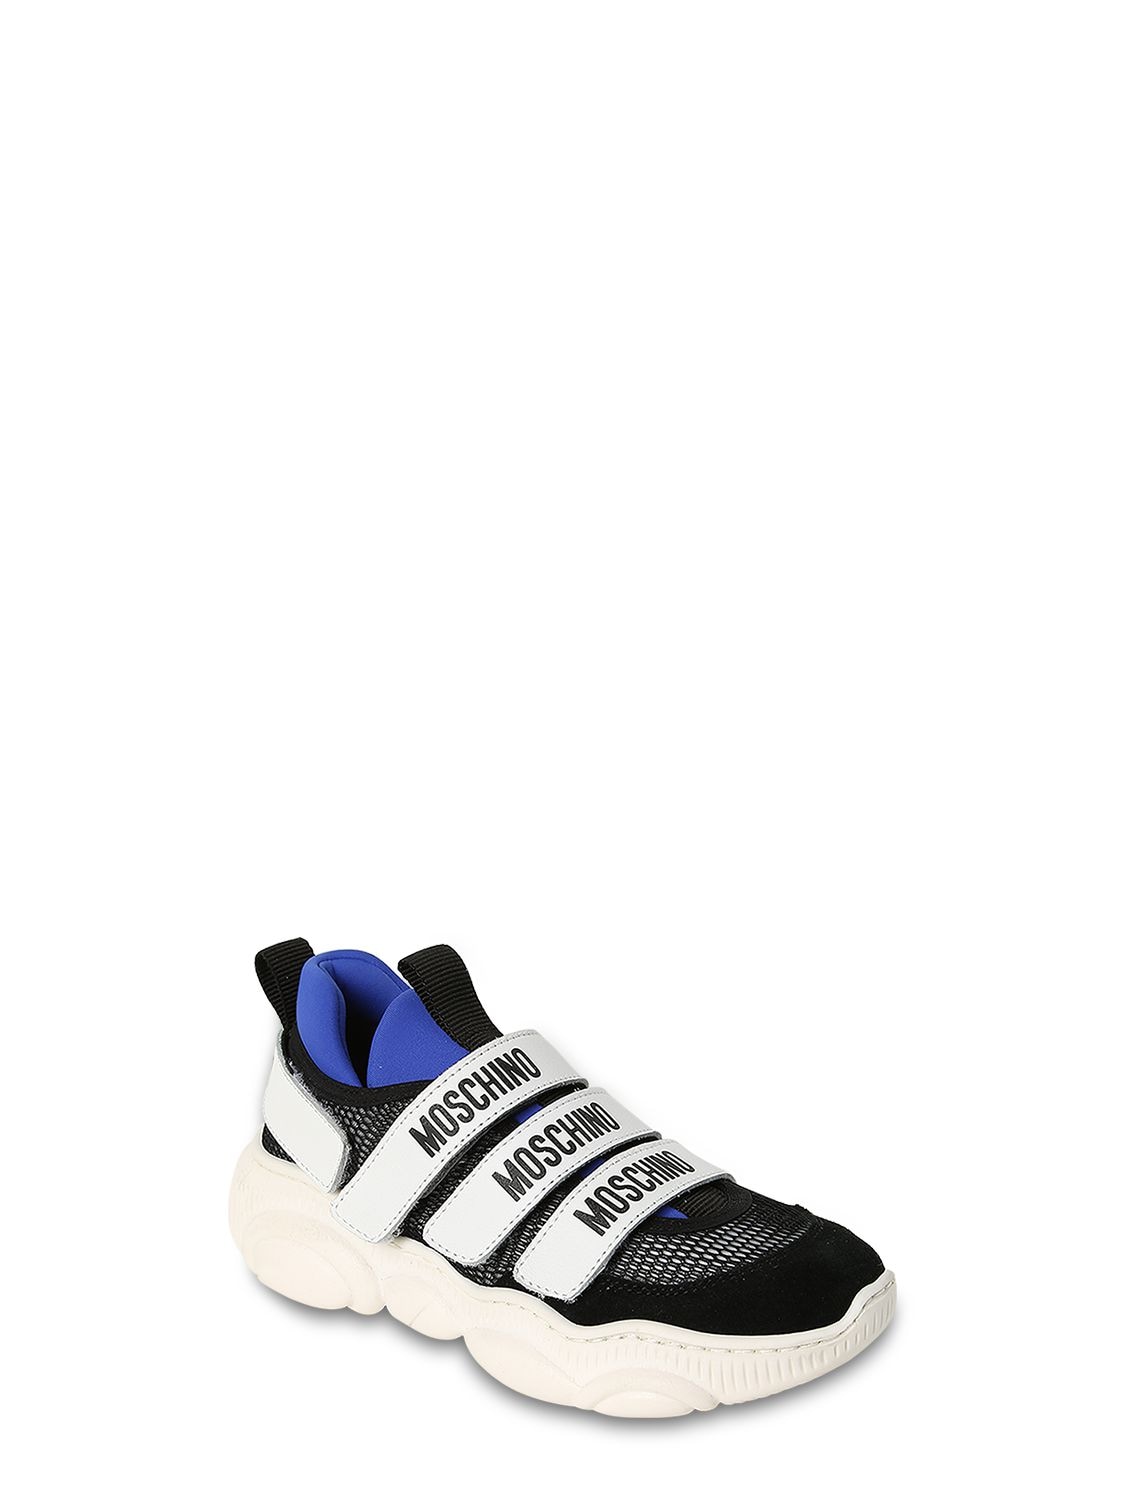 Moschino Kids' Leather & Neoprene Strapped Sneakers In Multicolor